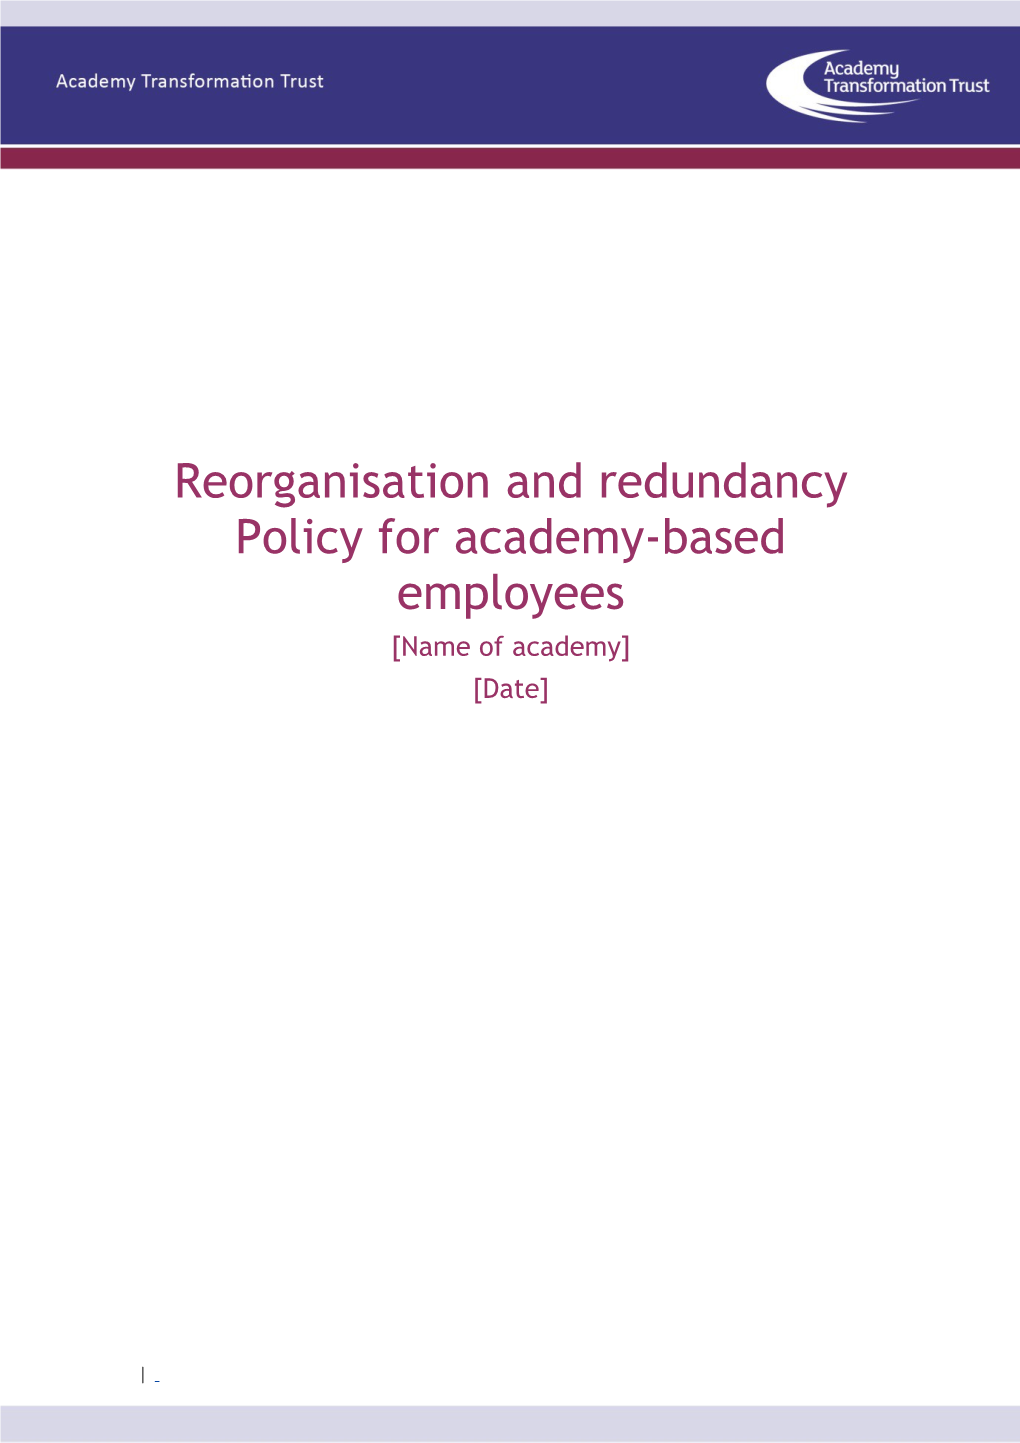 Reorganisation and Redundancy Policy for Academy-Based Employees